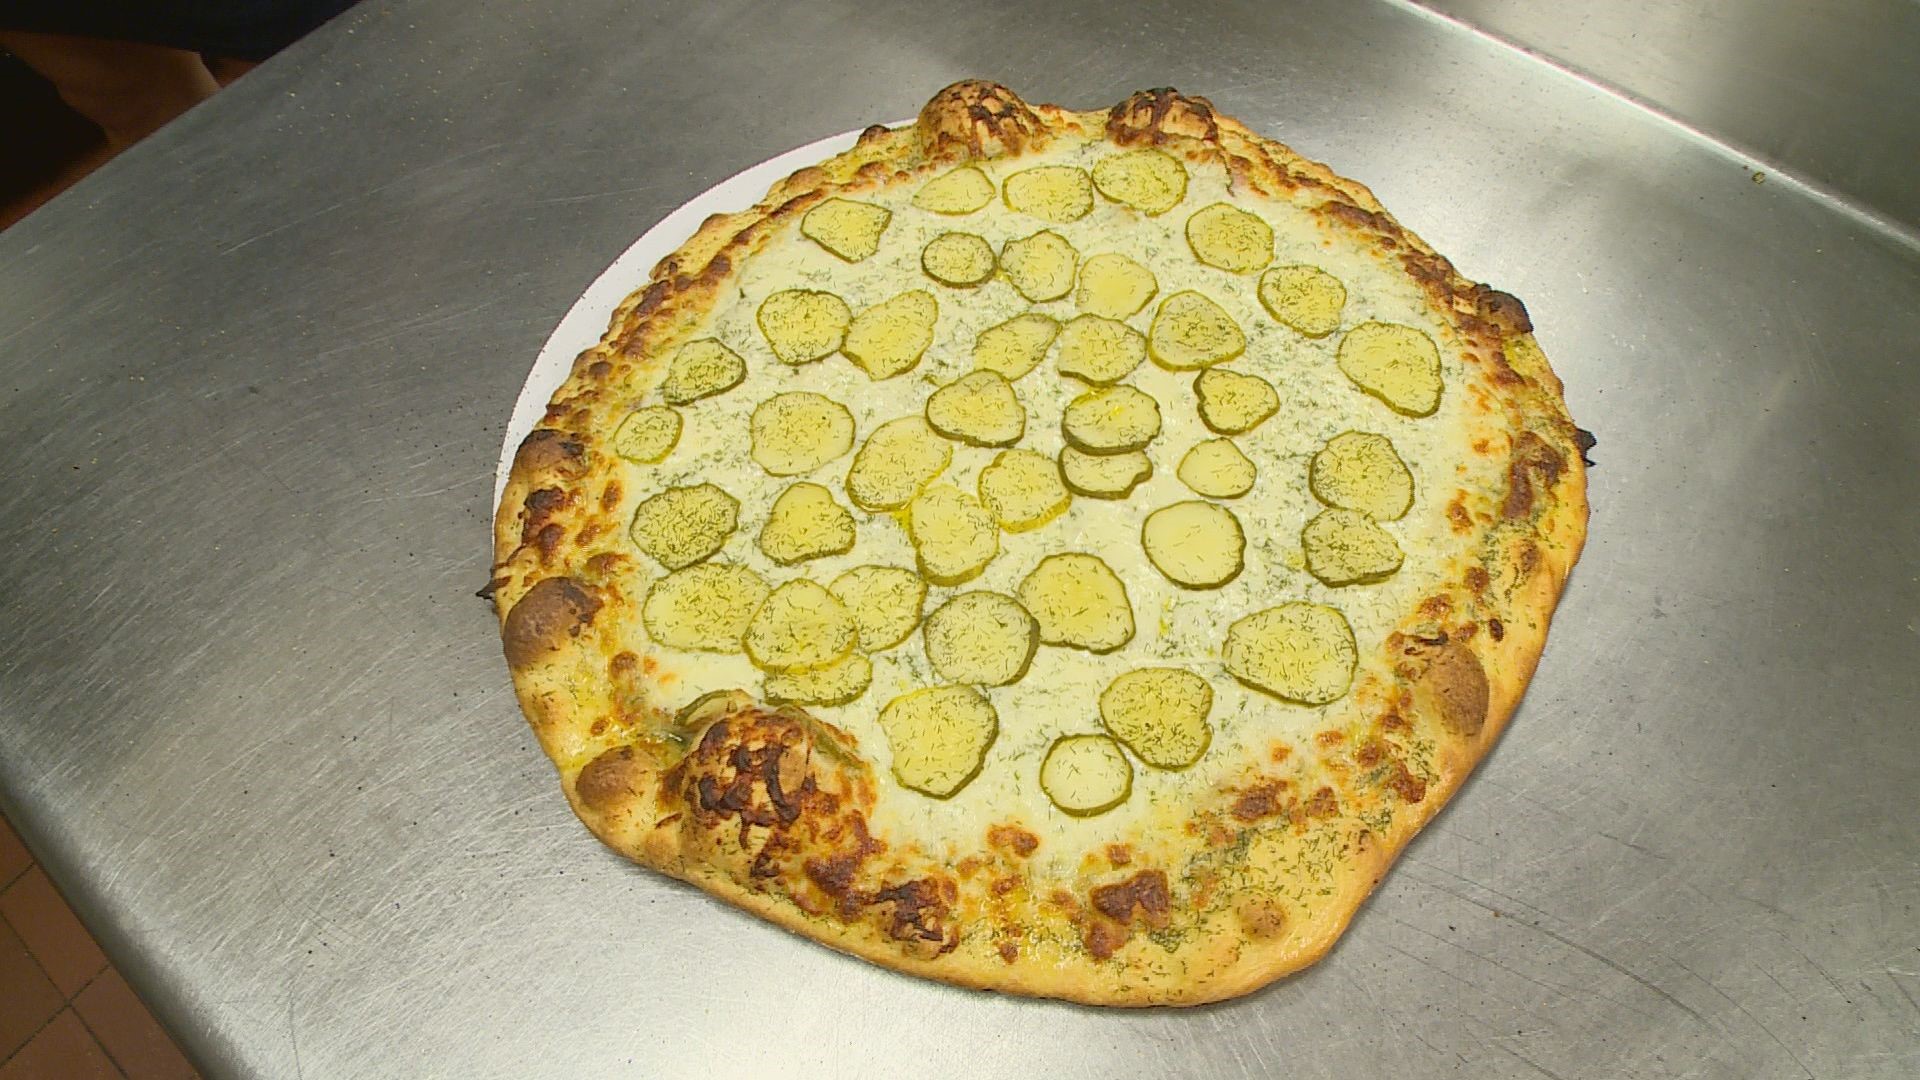 The 'Kinda Big Dill' pizza at QC Pizza in Mahtomedi has gone viral. Would you try the pickle-flavored pie?